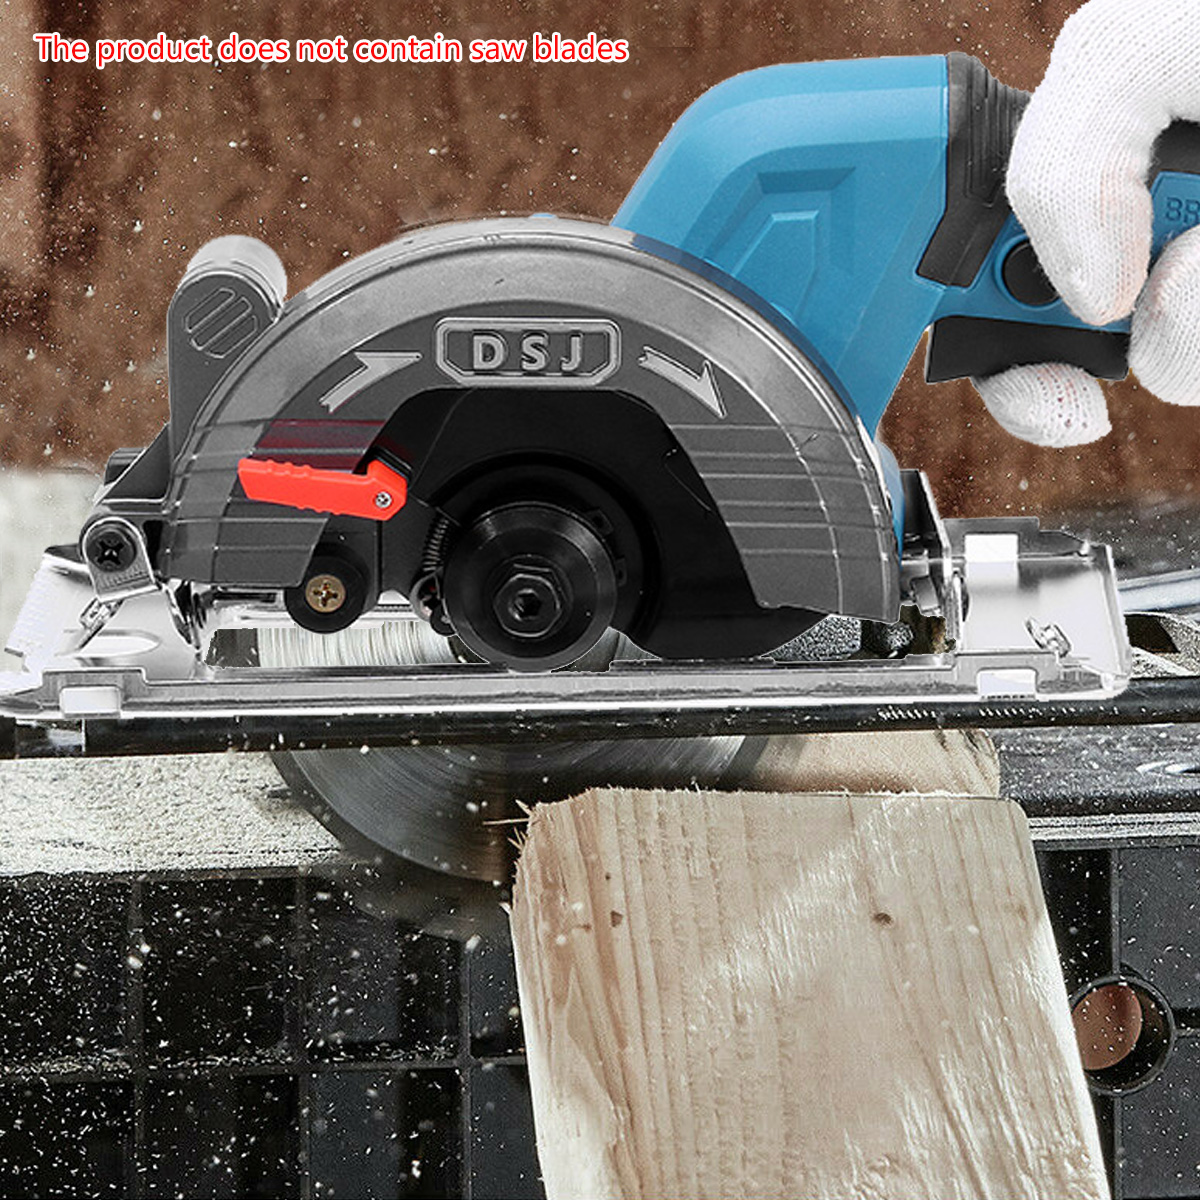 Electric-Circular-Saw-388VF-125mm-Saw-Blade-Brushless-Multi-Angle-Cutting-Suitable-With-18v-Battery-1941553-2